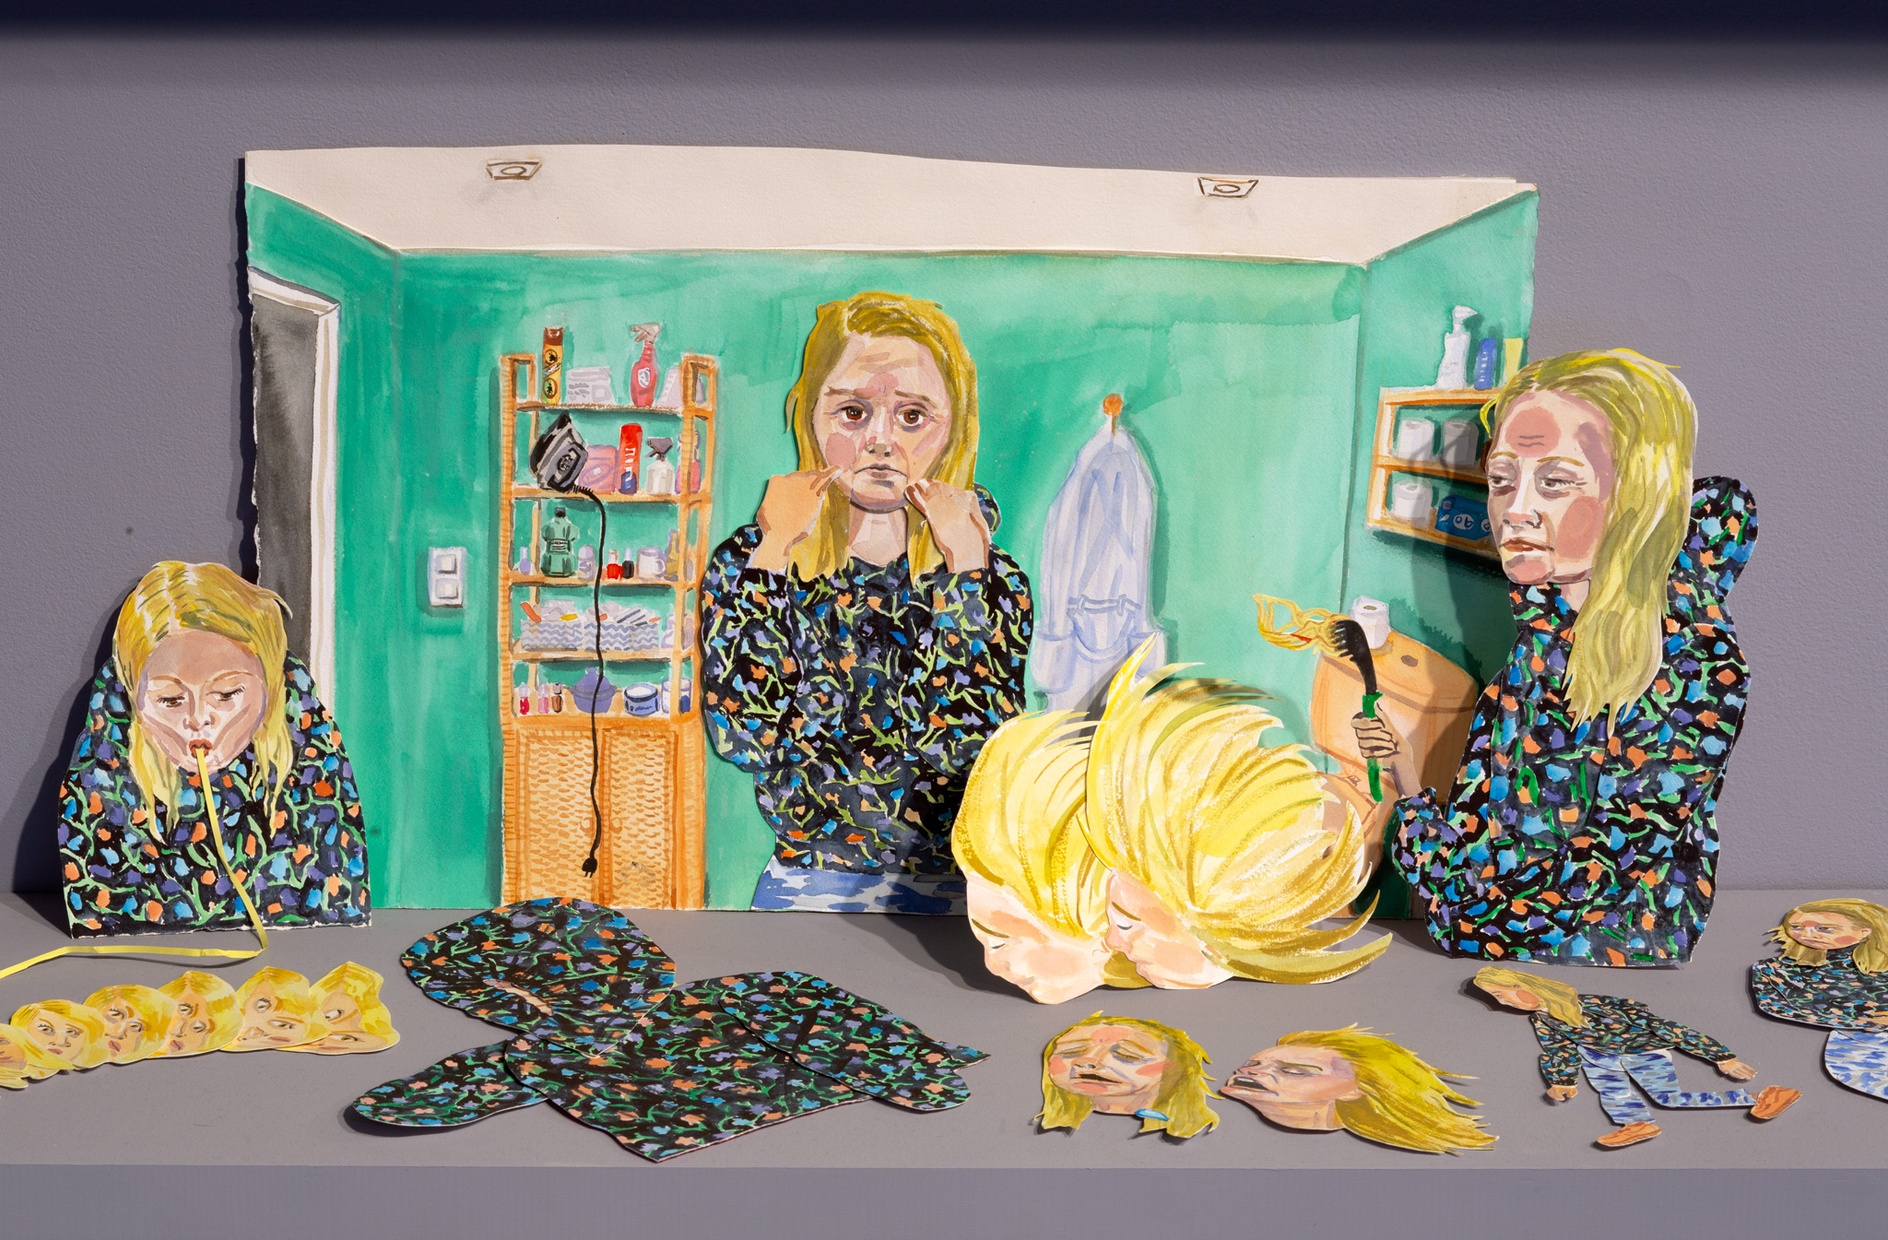 A painted watercolor scene of a blond woman in a bathroom with additional painted cutouts of the same woman leaning against and below it.